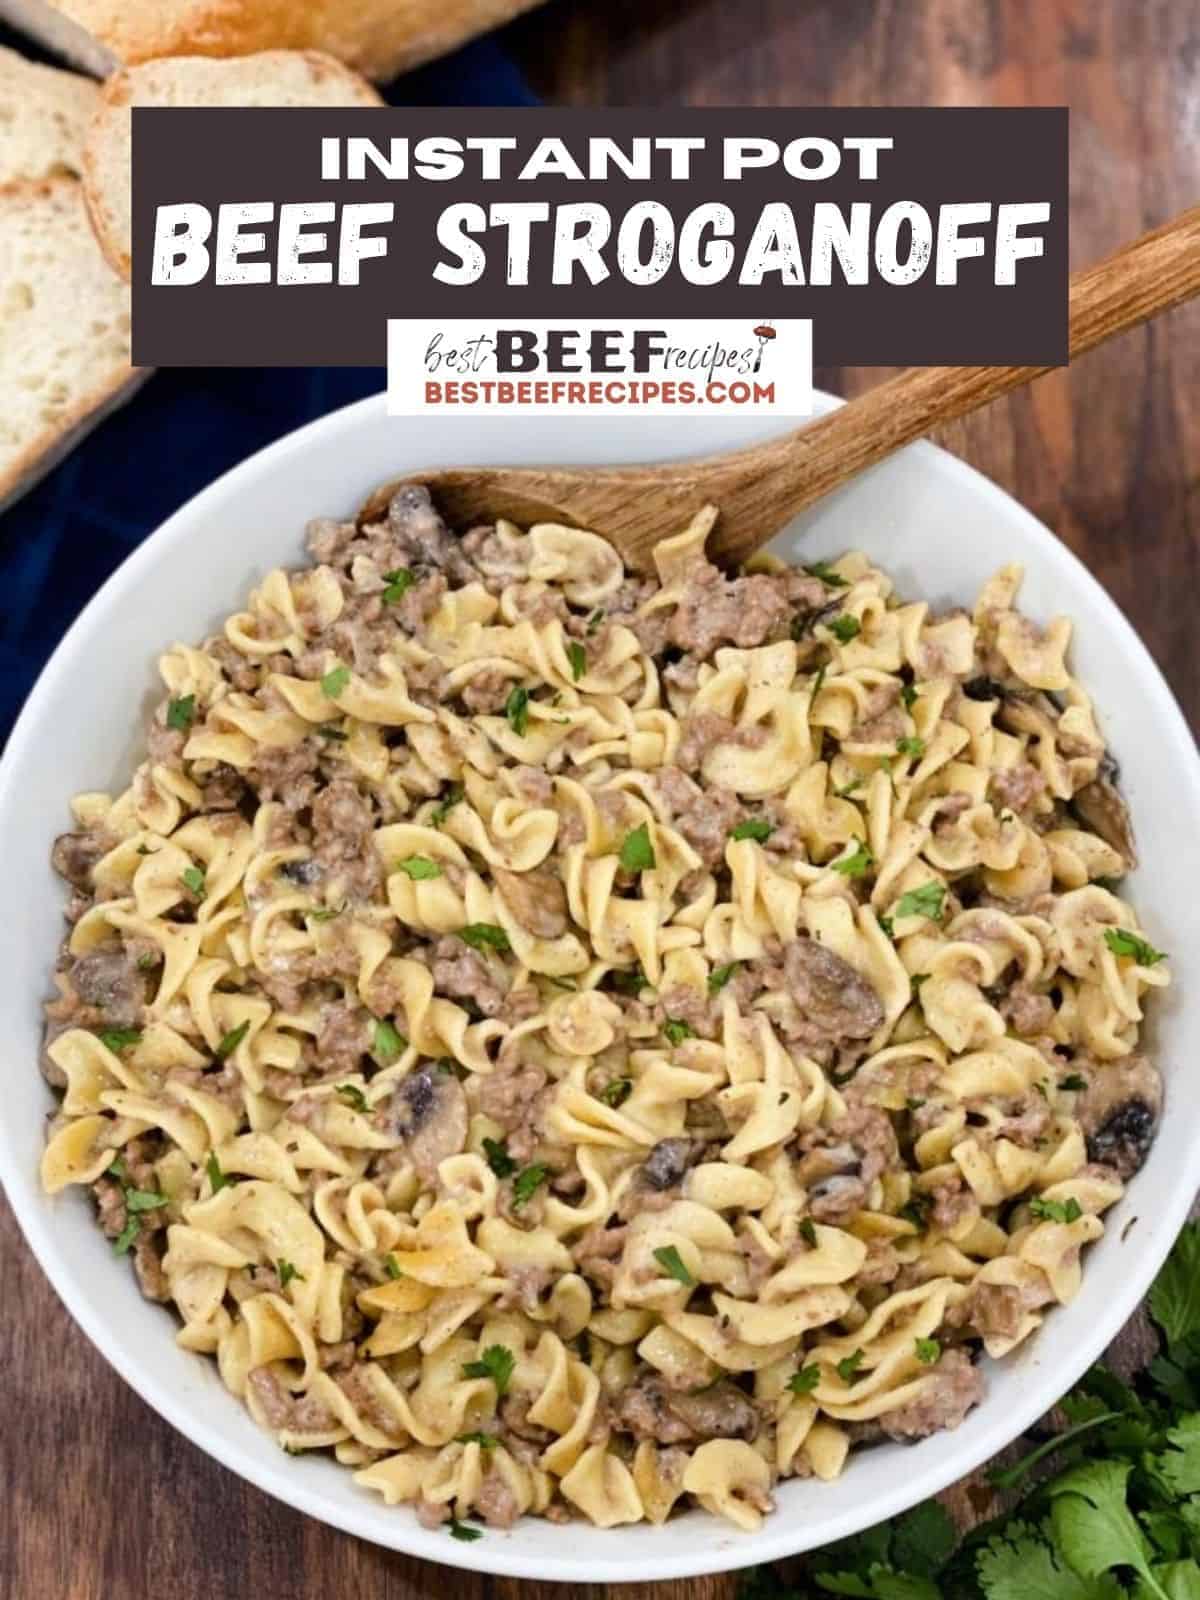 Instant pot beef stroganoff in a bowl